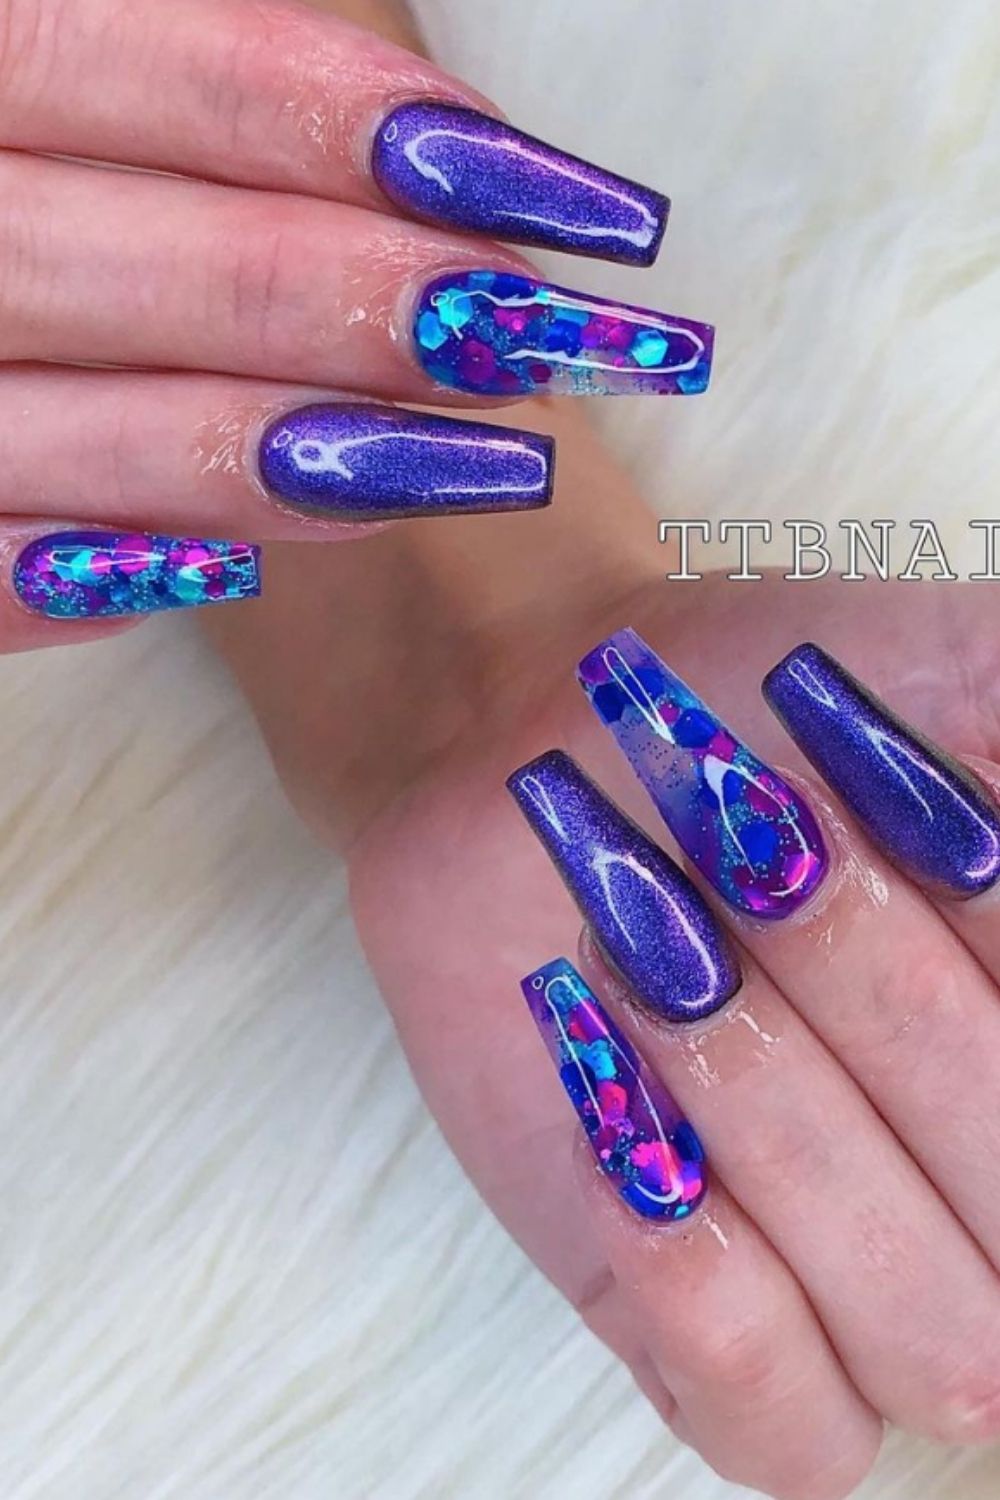  Purple nails for summer nail colors become a hit in the summer holiday.